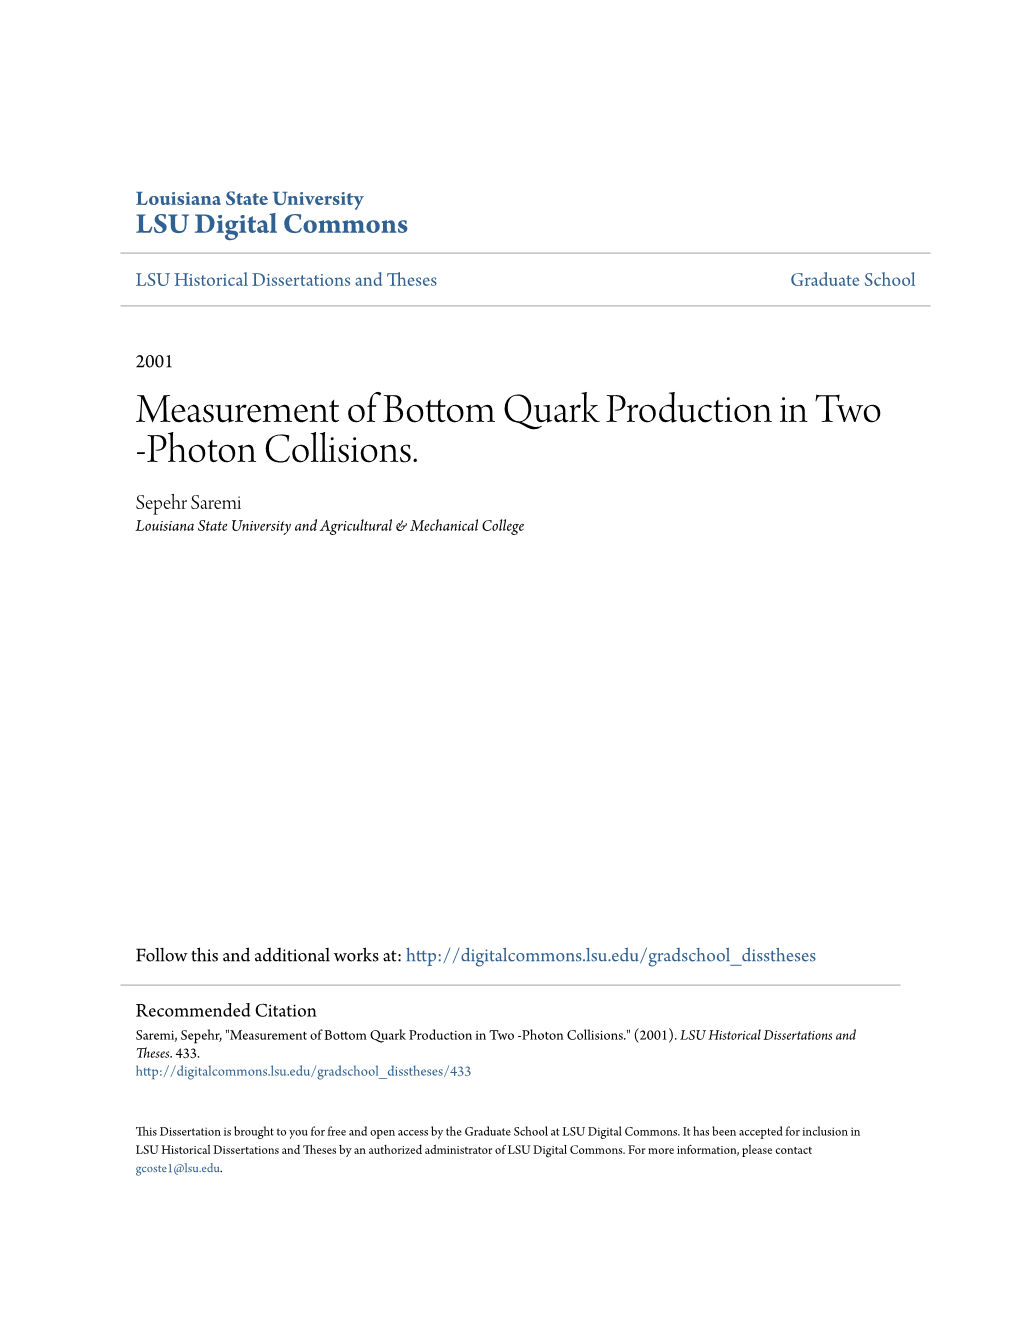 Measurement of Bottom Quark Production in Two Photon Collisions